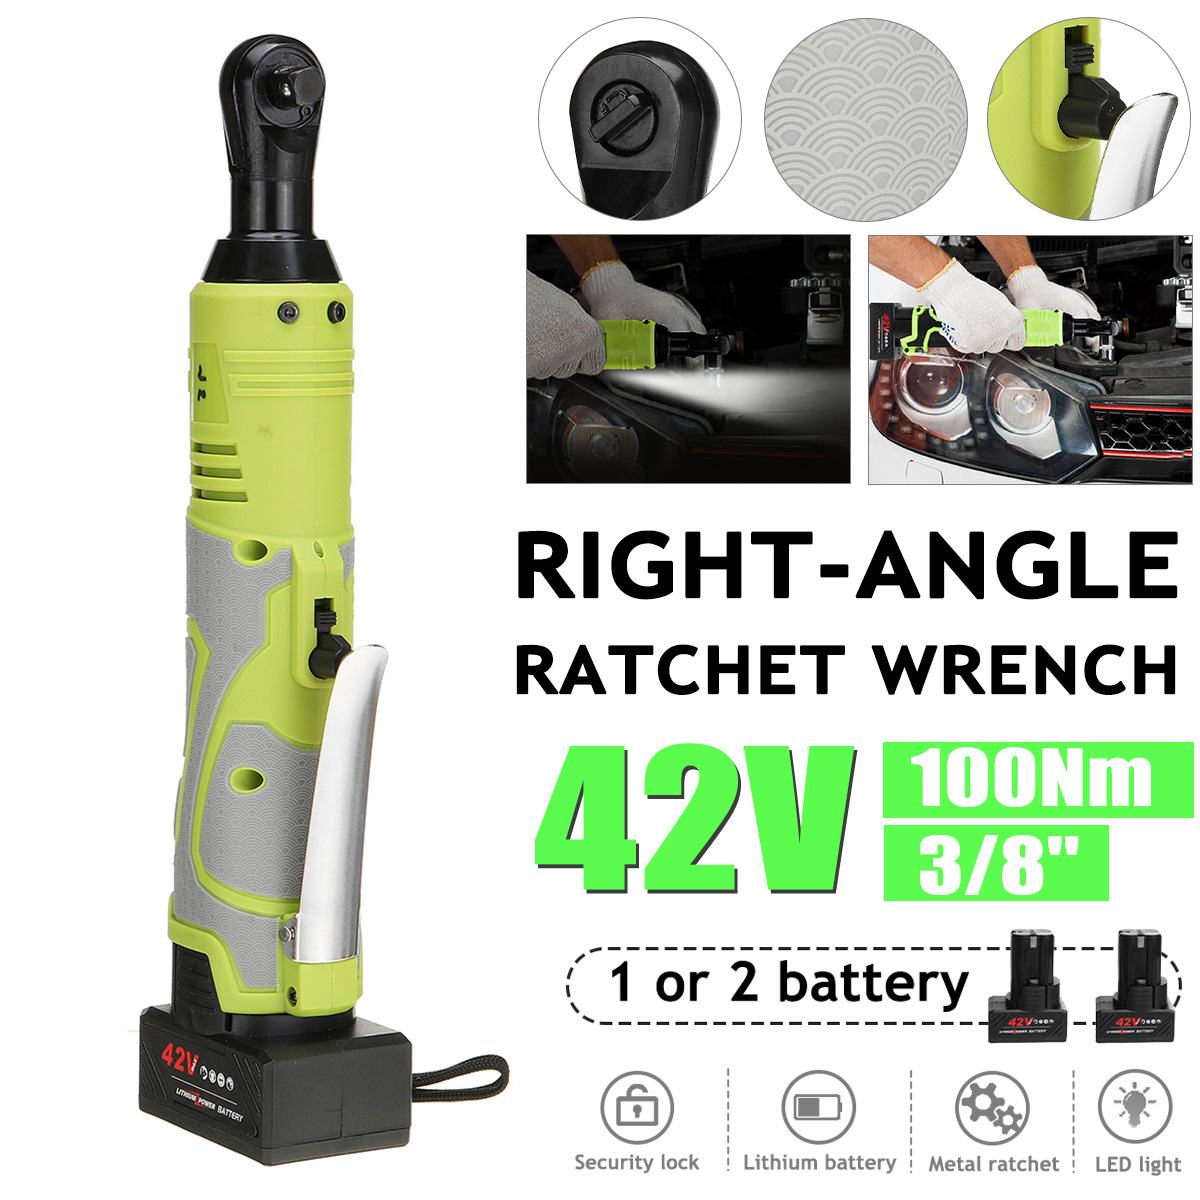 42V 100Nm Electric Wrench 3/8" Cordless Ratchet Rechargeable Scaffolding Right Angle Wrench Tool with 1/2 Battery Charger Kit